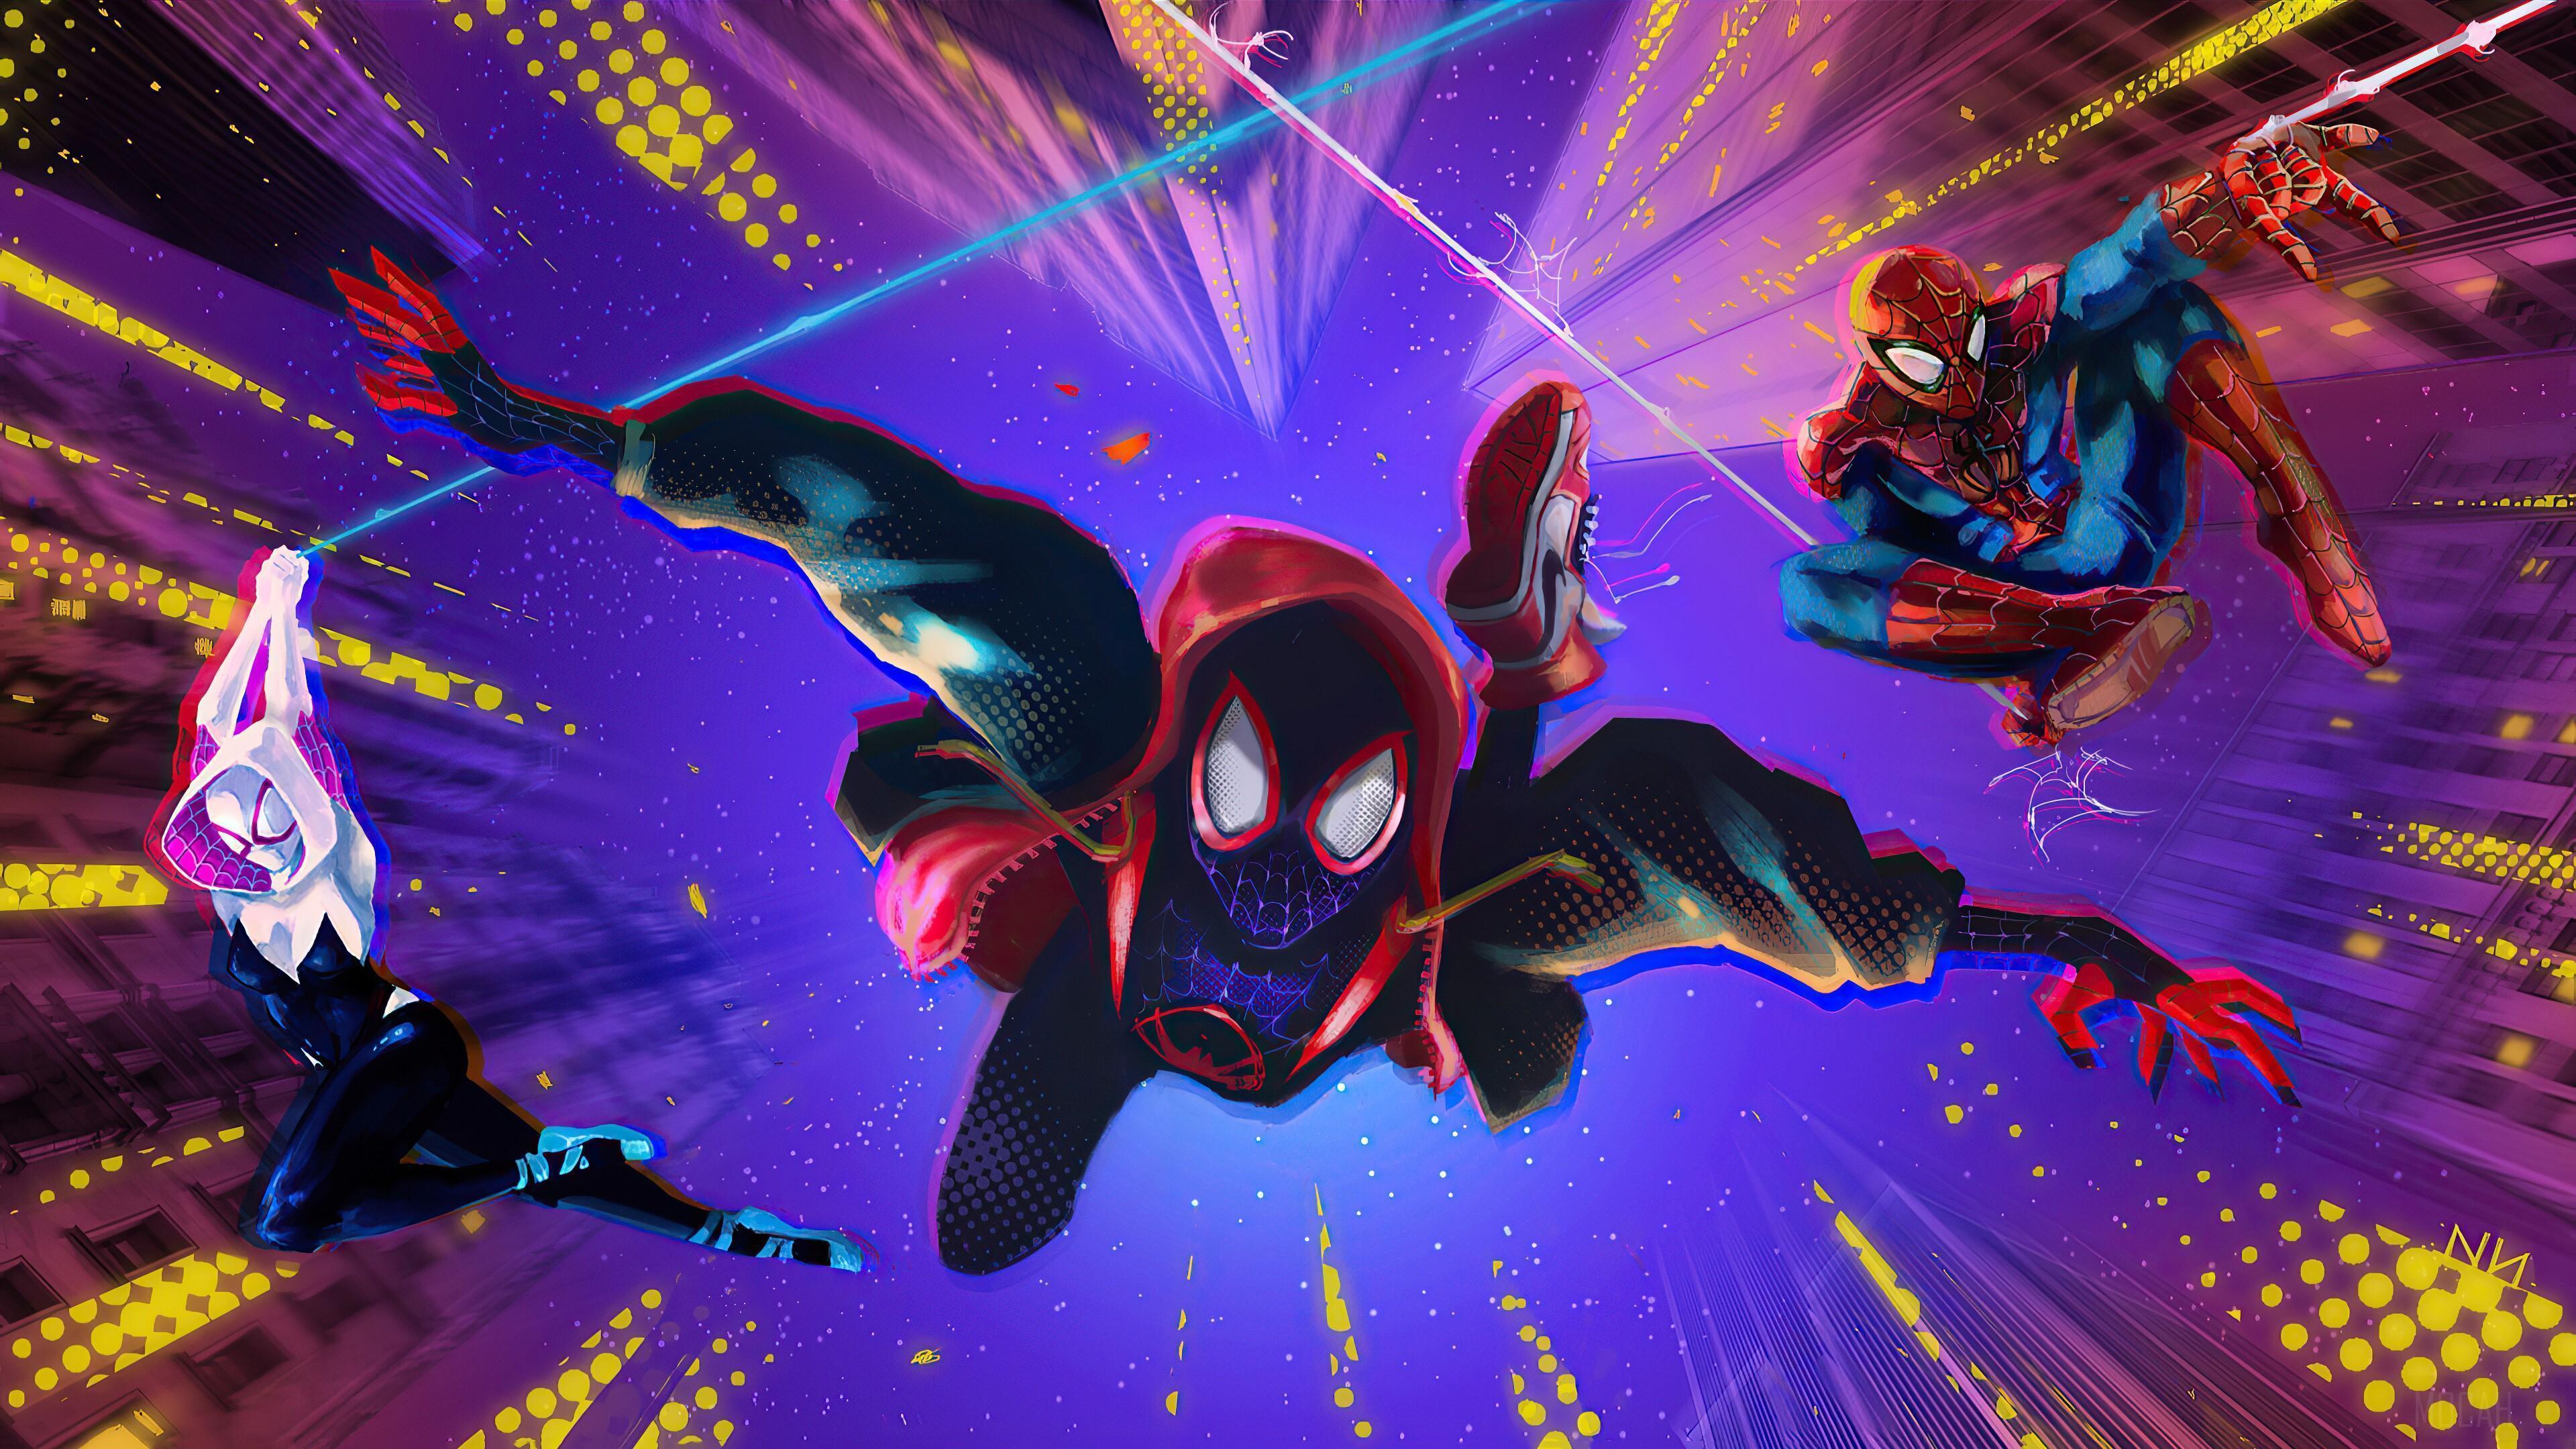 HD wallpaper, Miles Morales, Movie, Gwen Stacy 4K, Spider Man, Peter Parker, Spider Gwen, Miles Morales, Spider Man Into The Spider Verse